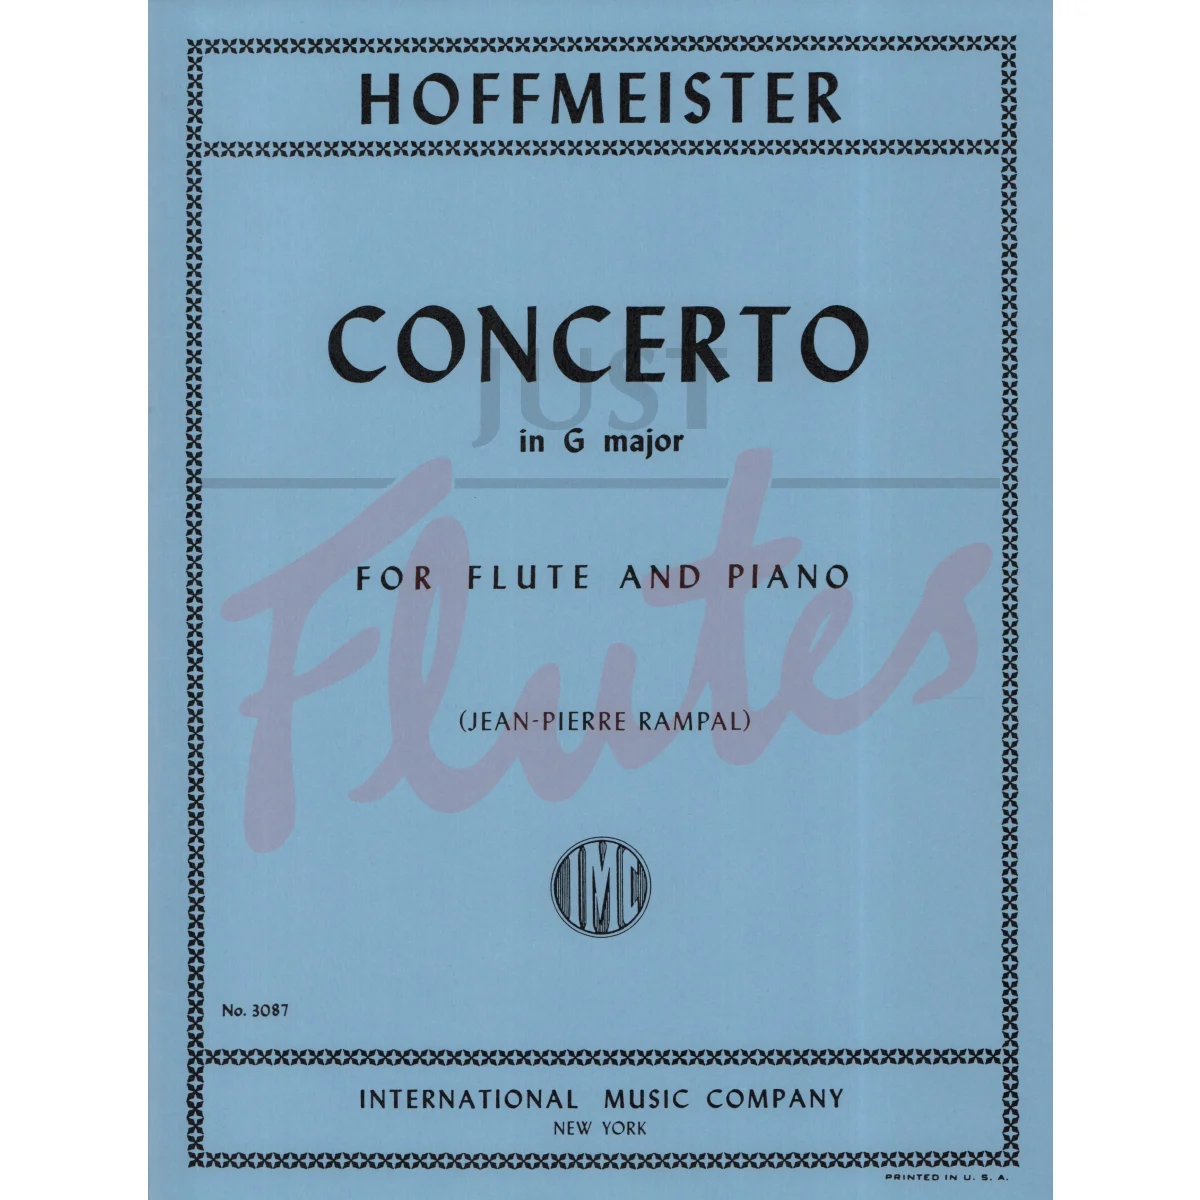 Concerto No. 8 in G major for Flute and Piano